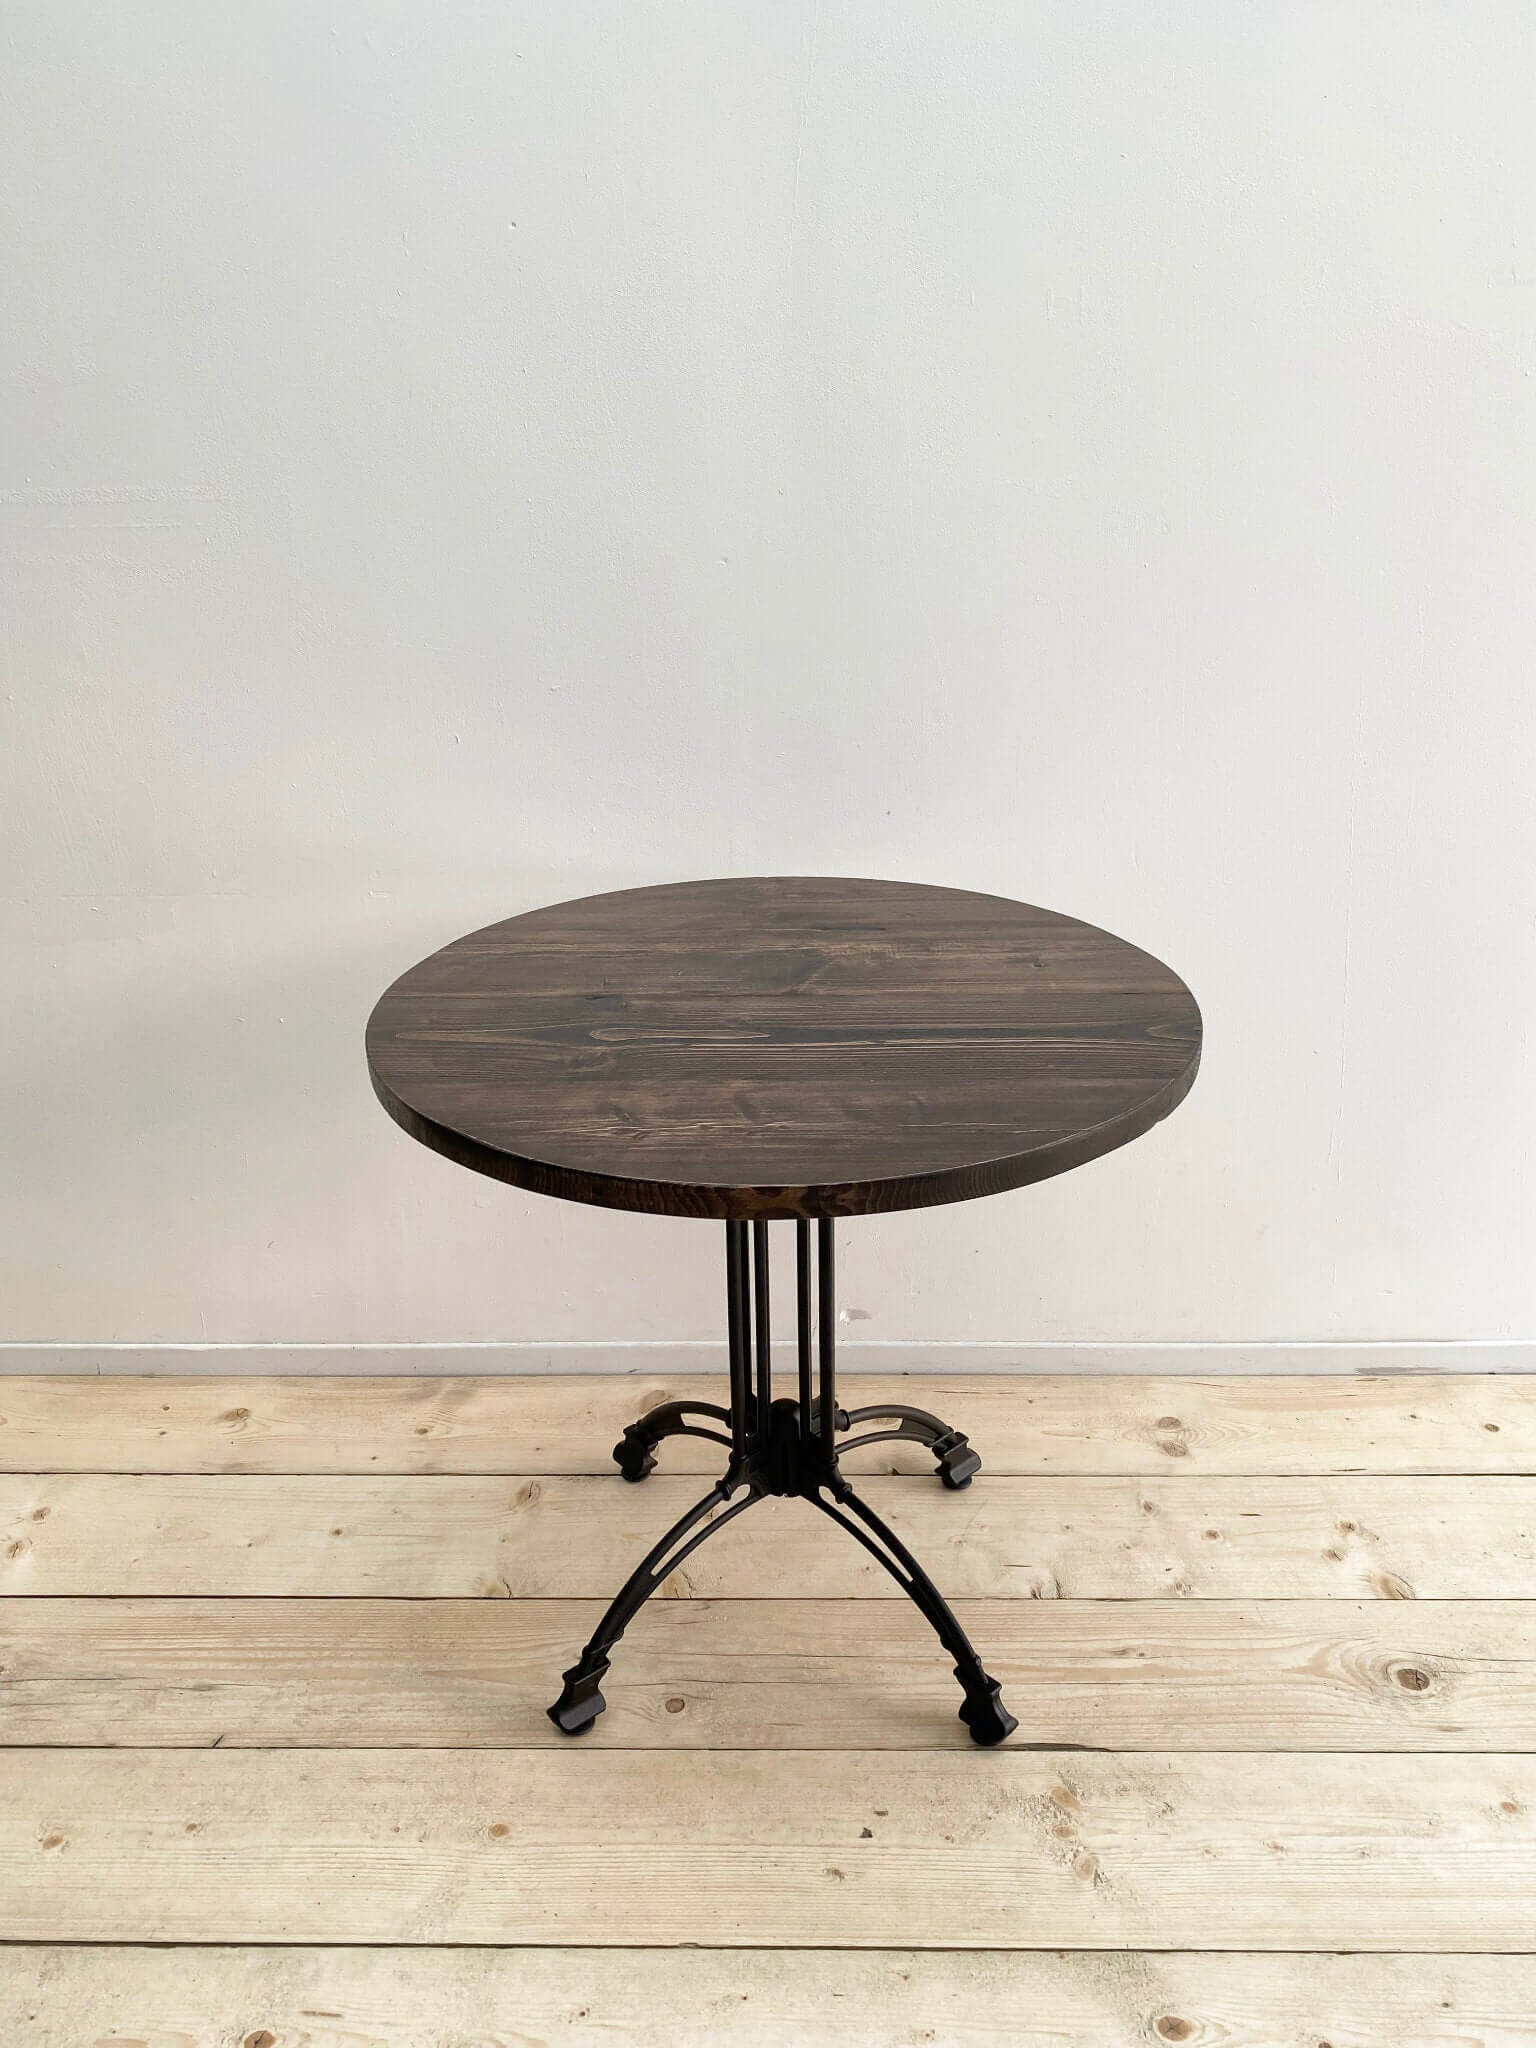 Reclaimed wood circle dining table with pedestal.